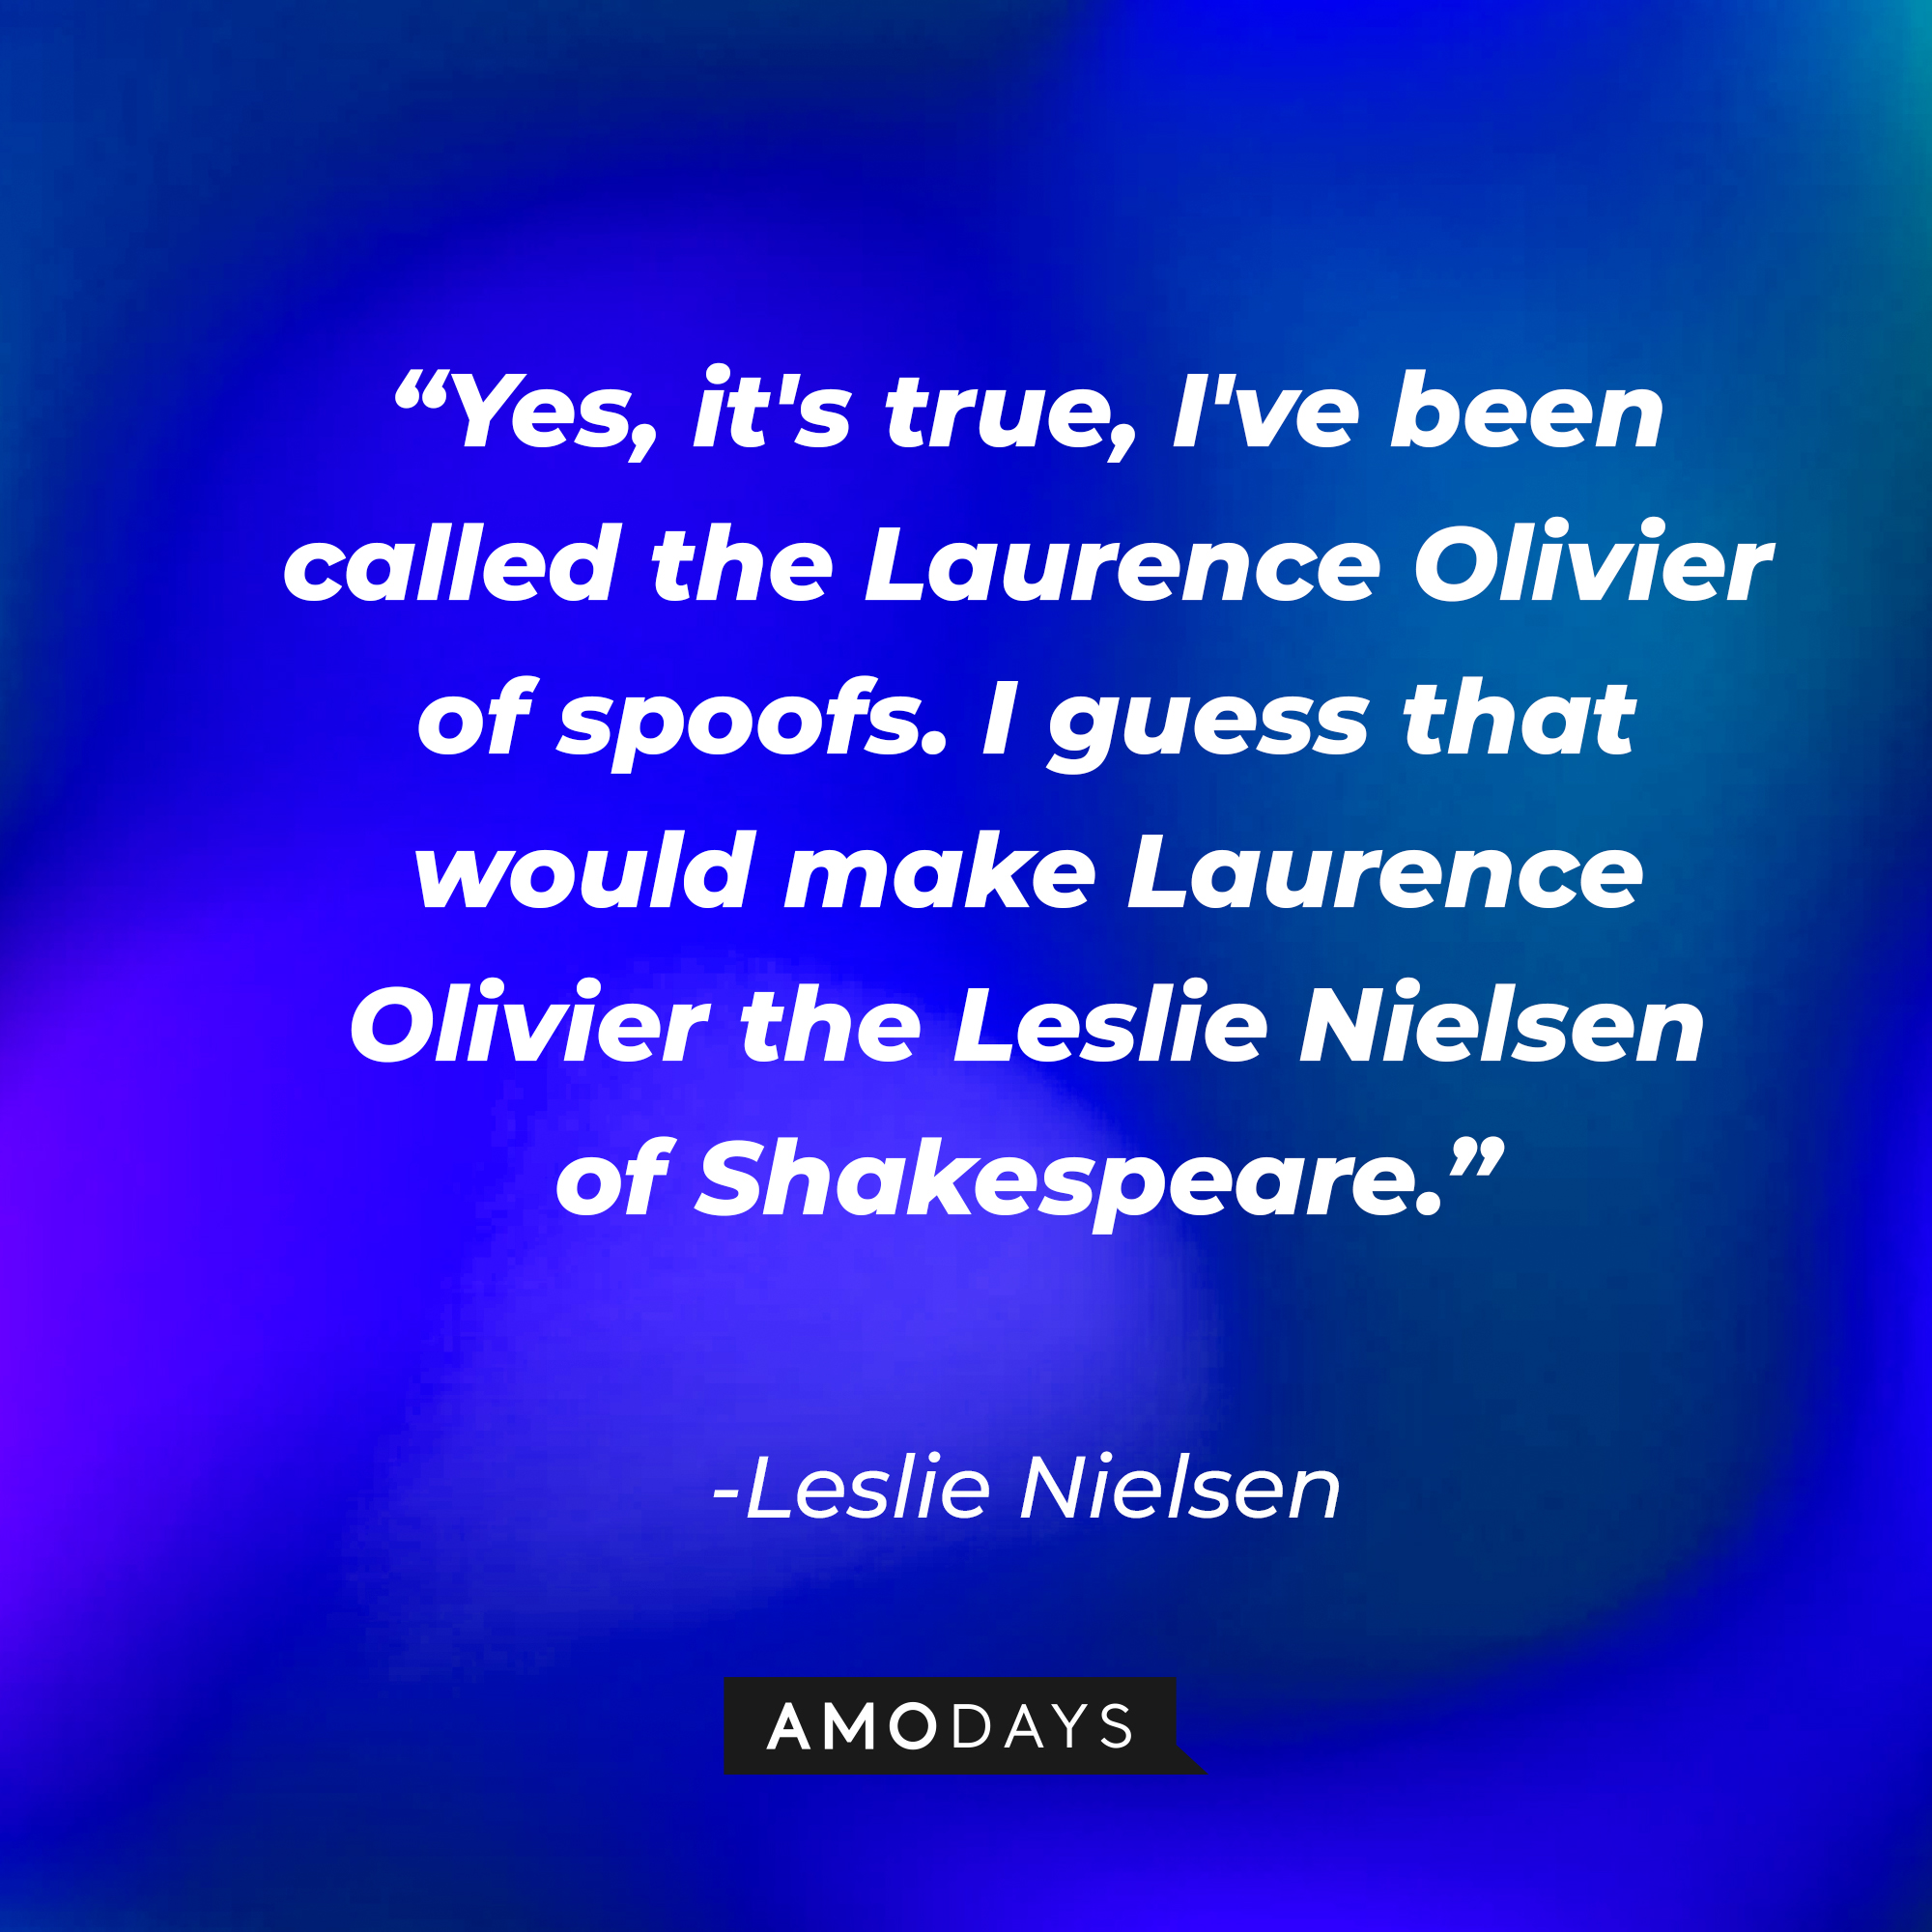 Leslie Nielsen's quote: "Yes, it's true, I've been called the Laurence Olivier of spoofs. I guess that would make Laurence Olivier the Leslie Nielsen of Shakespeare." | Source: Amodays